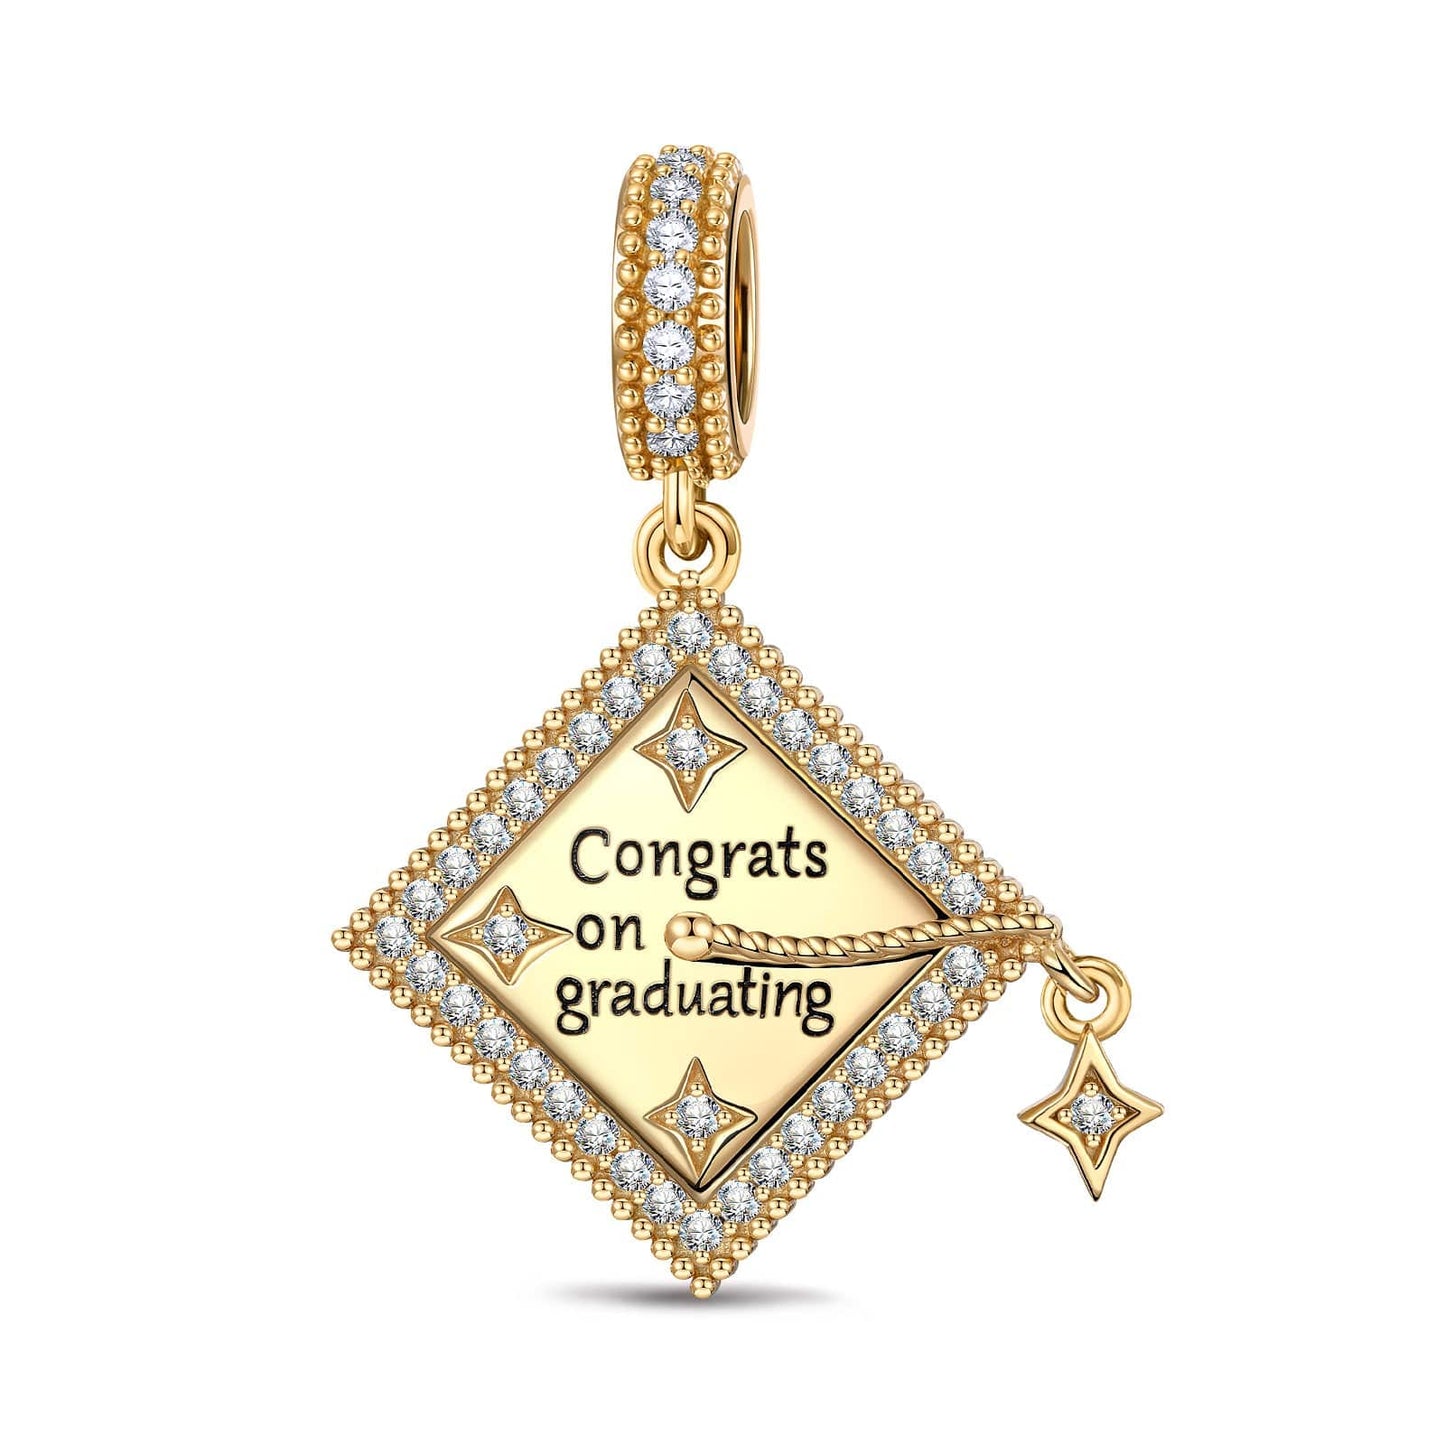 Congrats on Graduating Tarnish-resistant Silver Charms In 14K Gold Plated